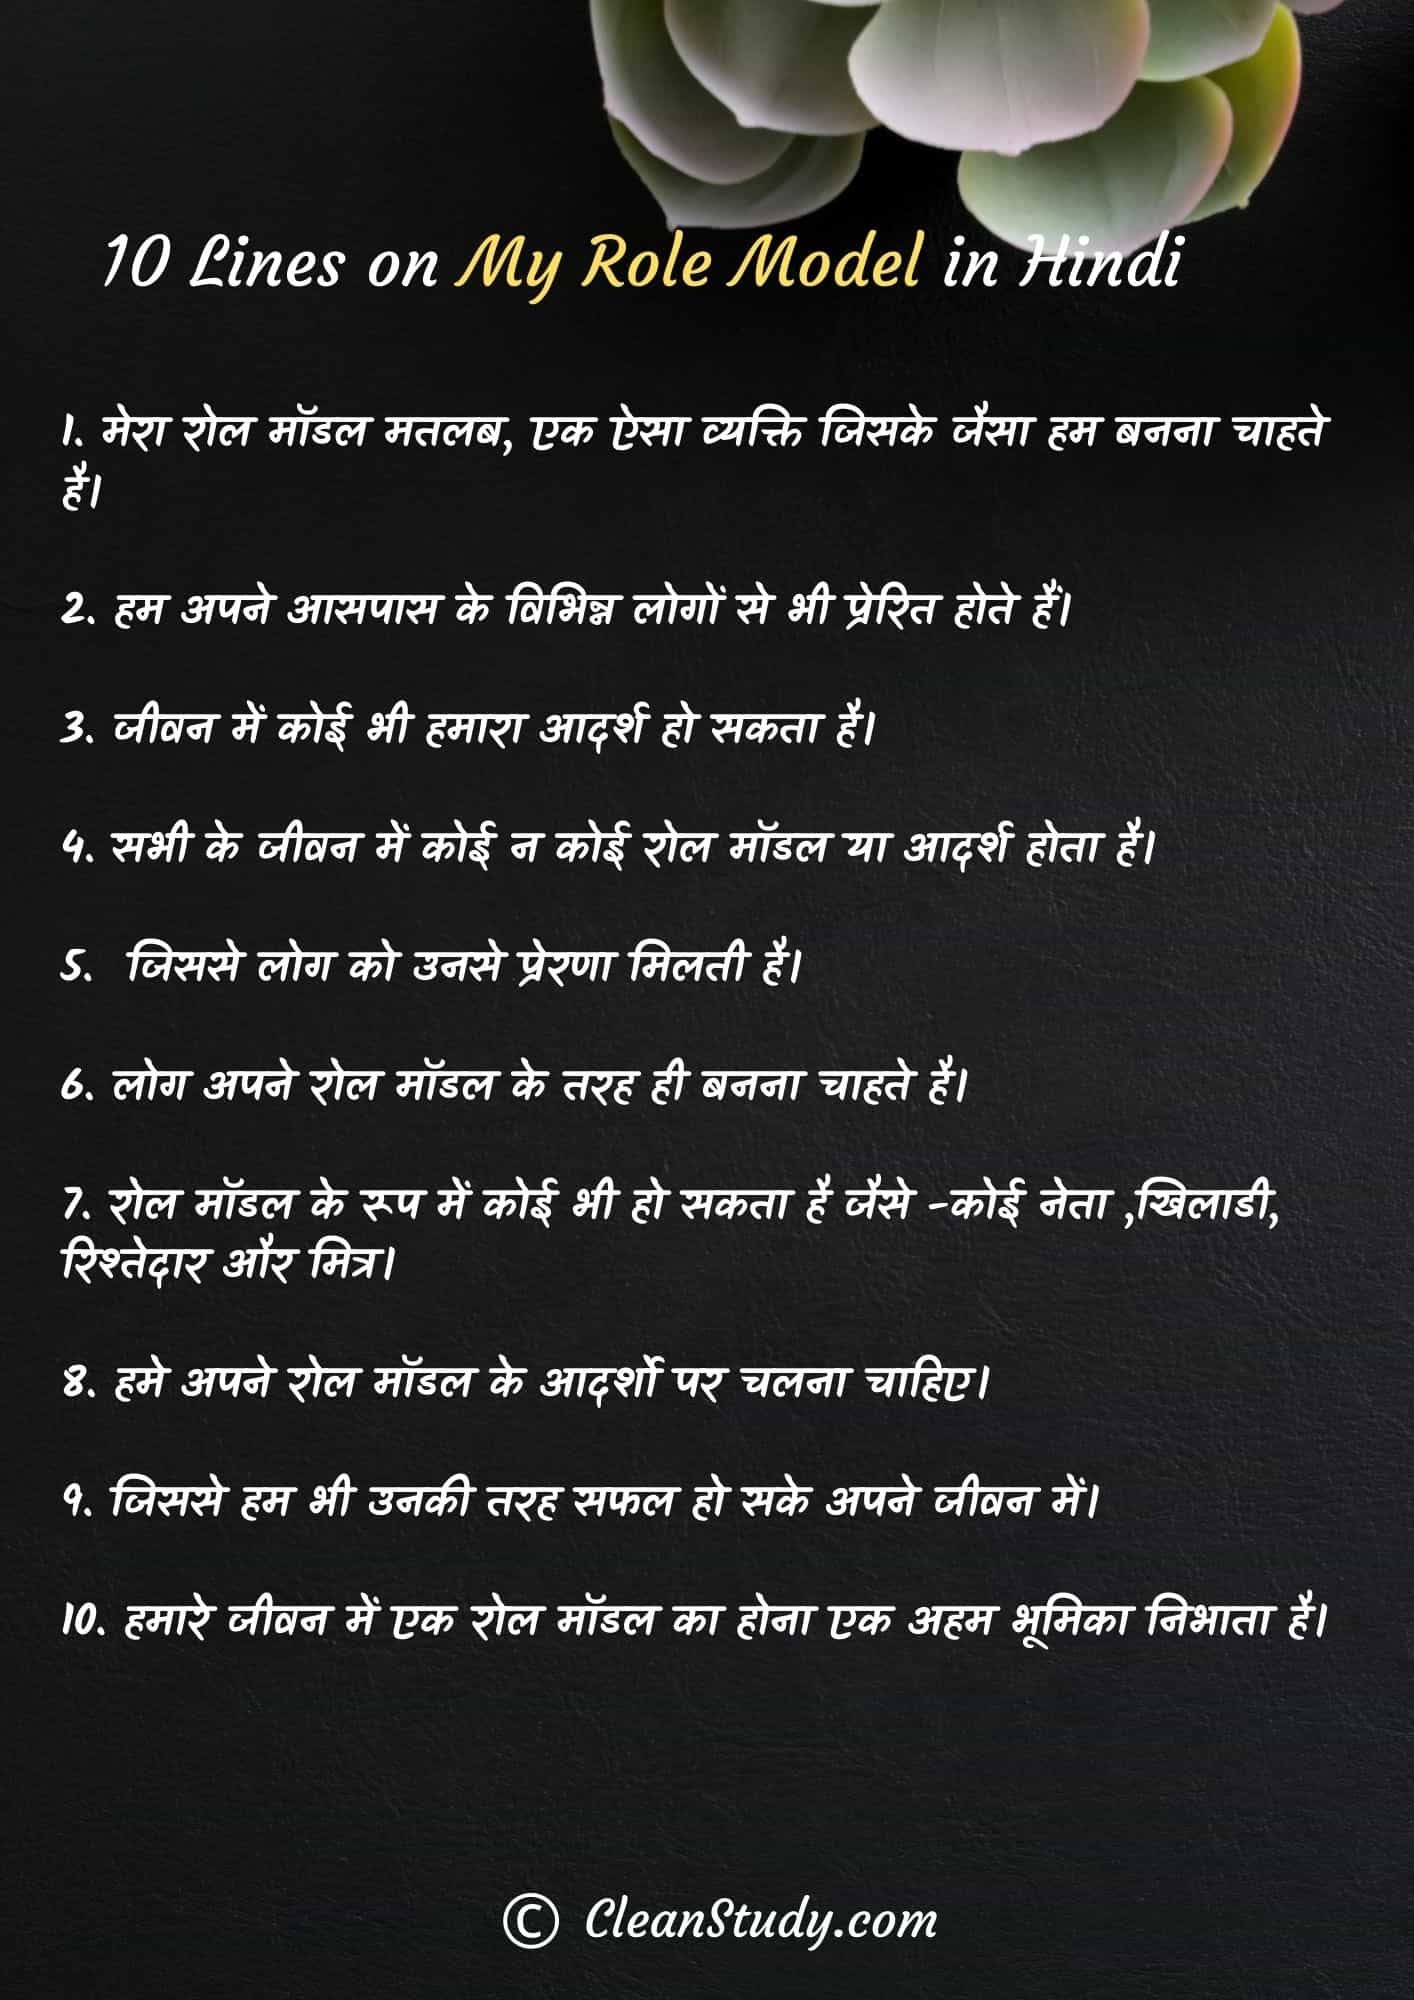 10 Lines on My Role Model in Hindi